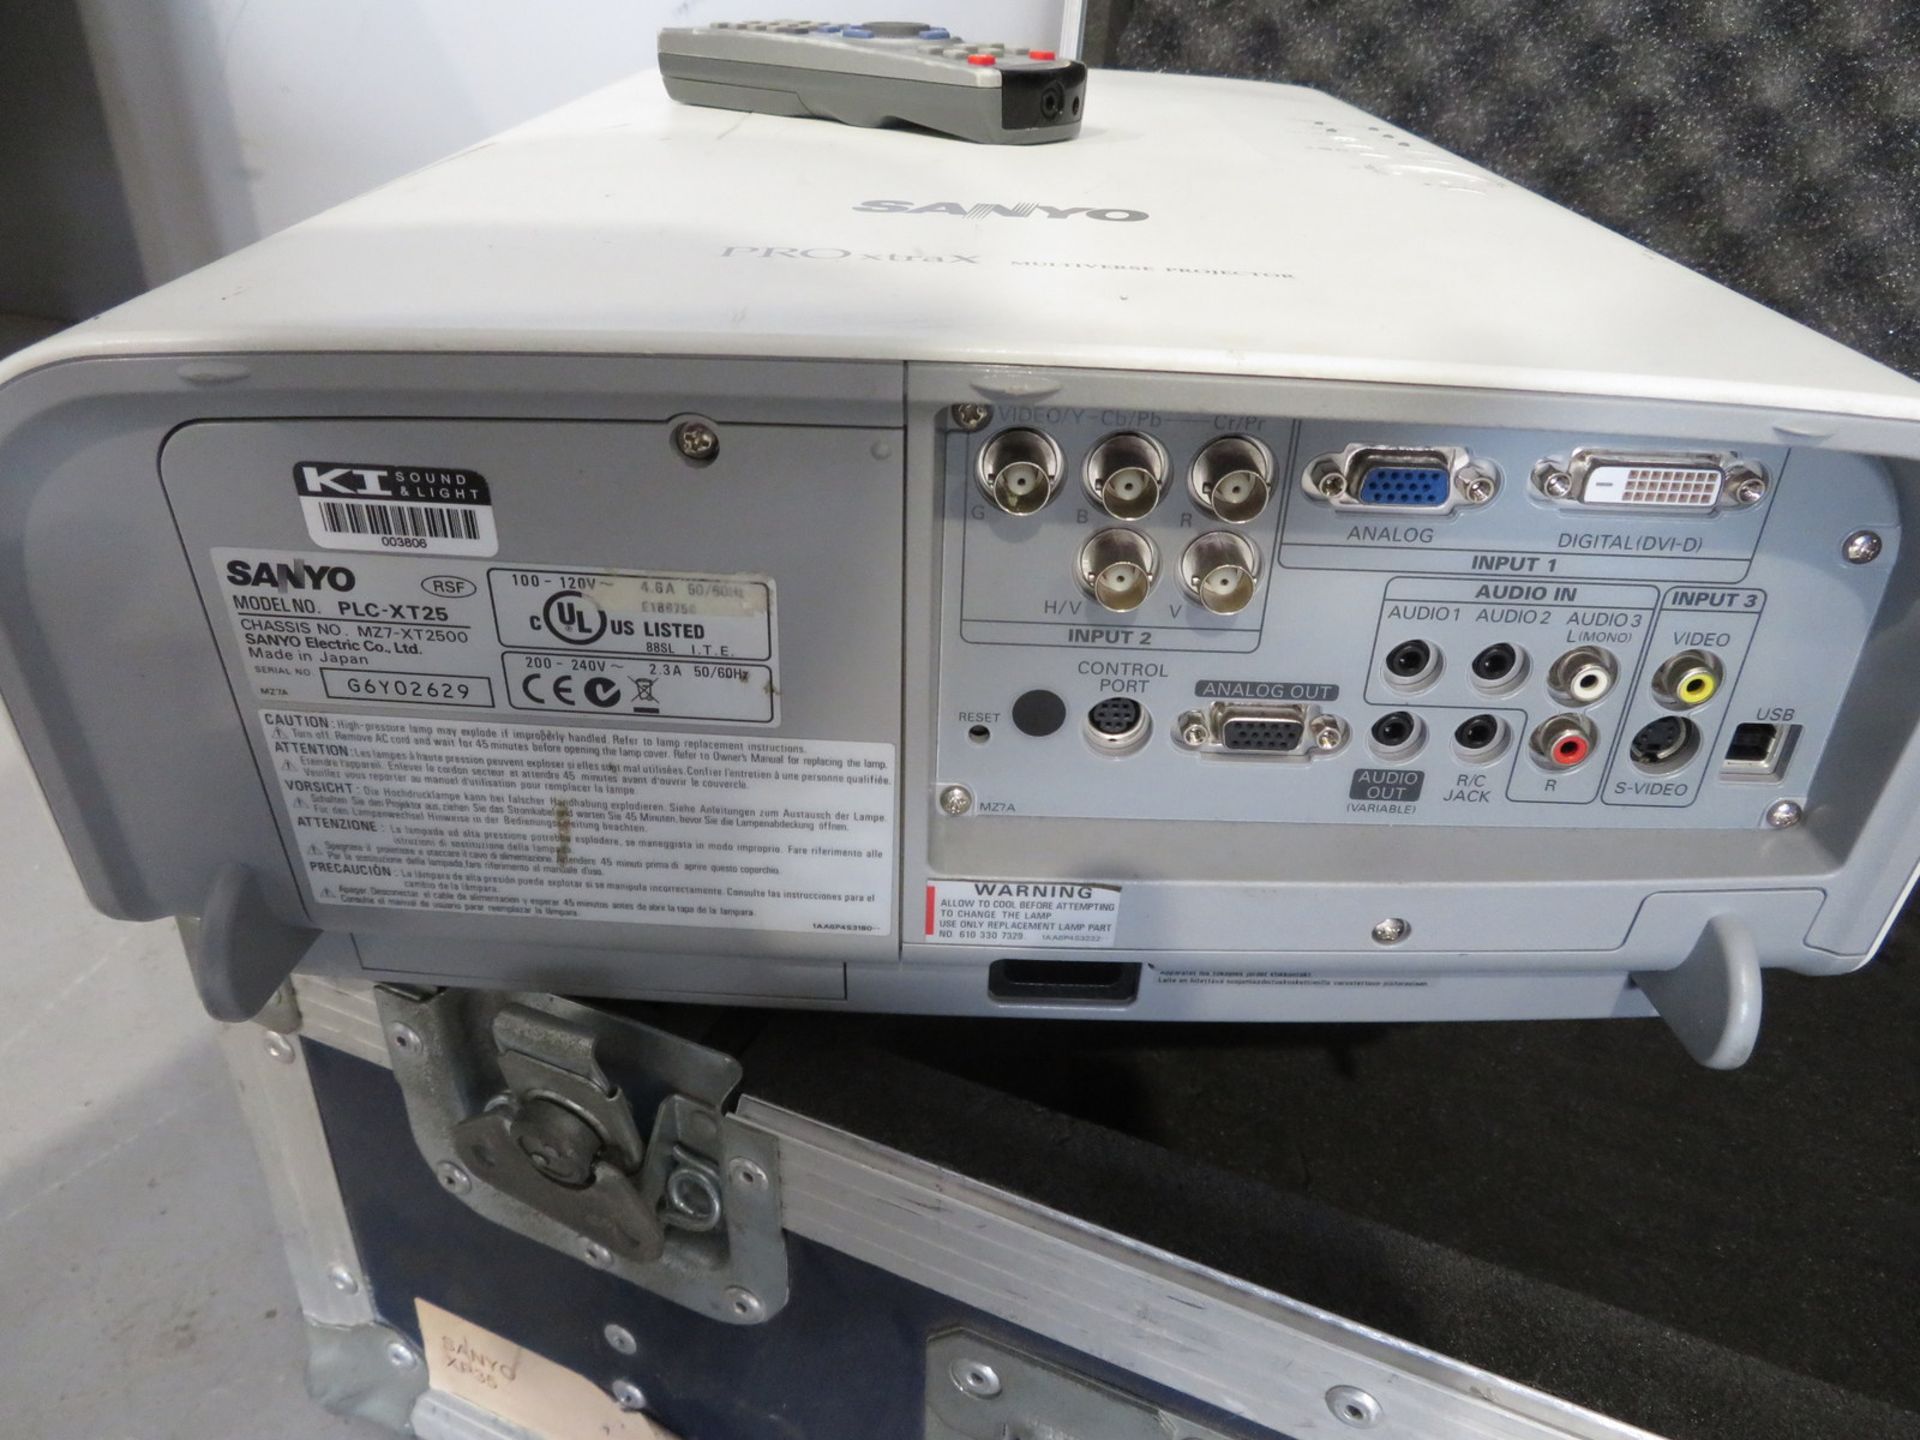 Sanyo XT25 Projector including lens in flightcase. Includes remote. Working condition. - Image 5 of 9